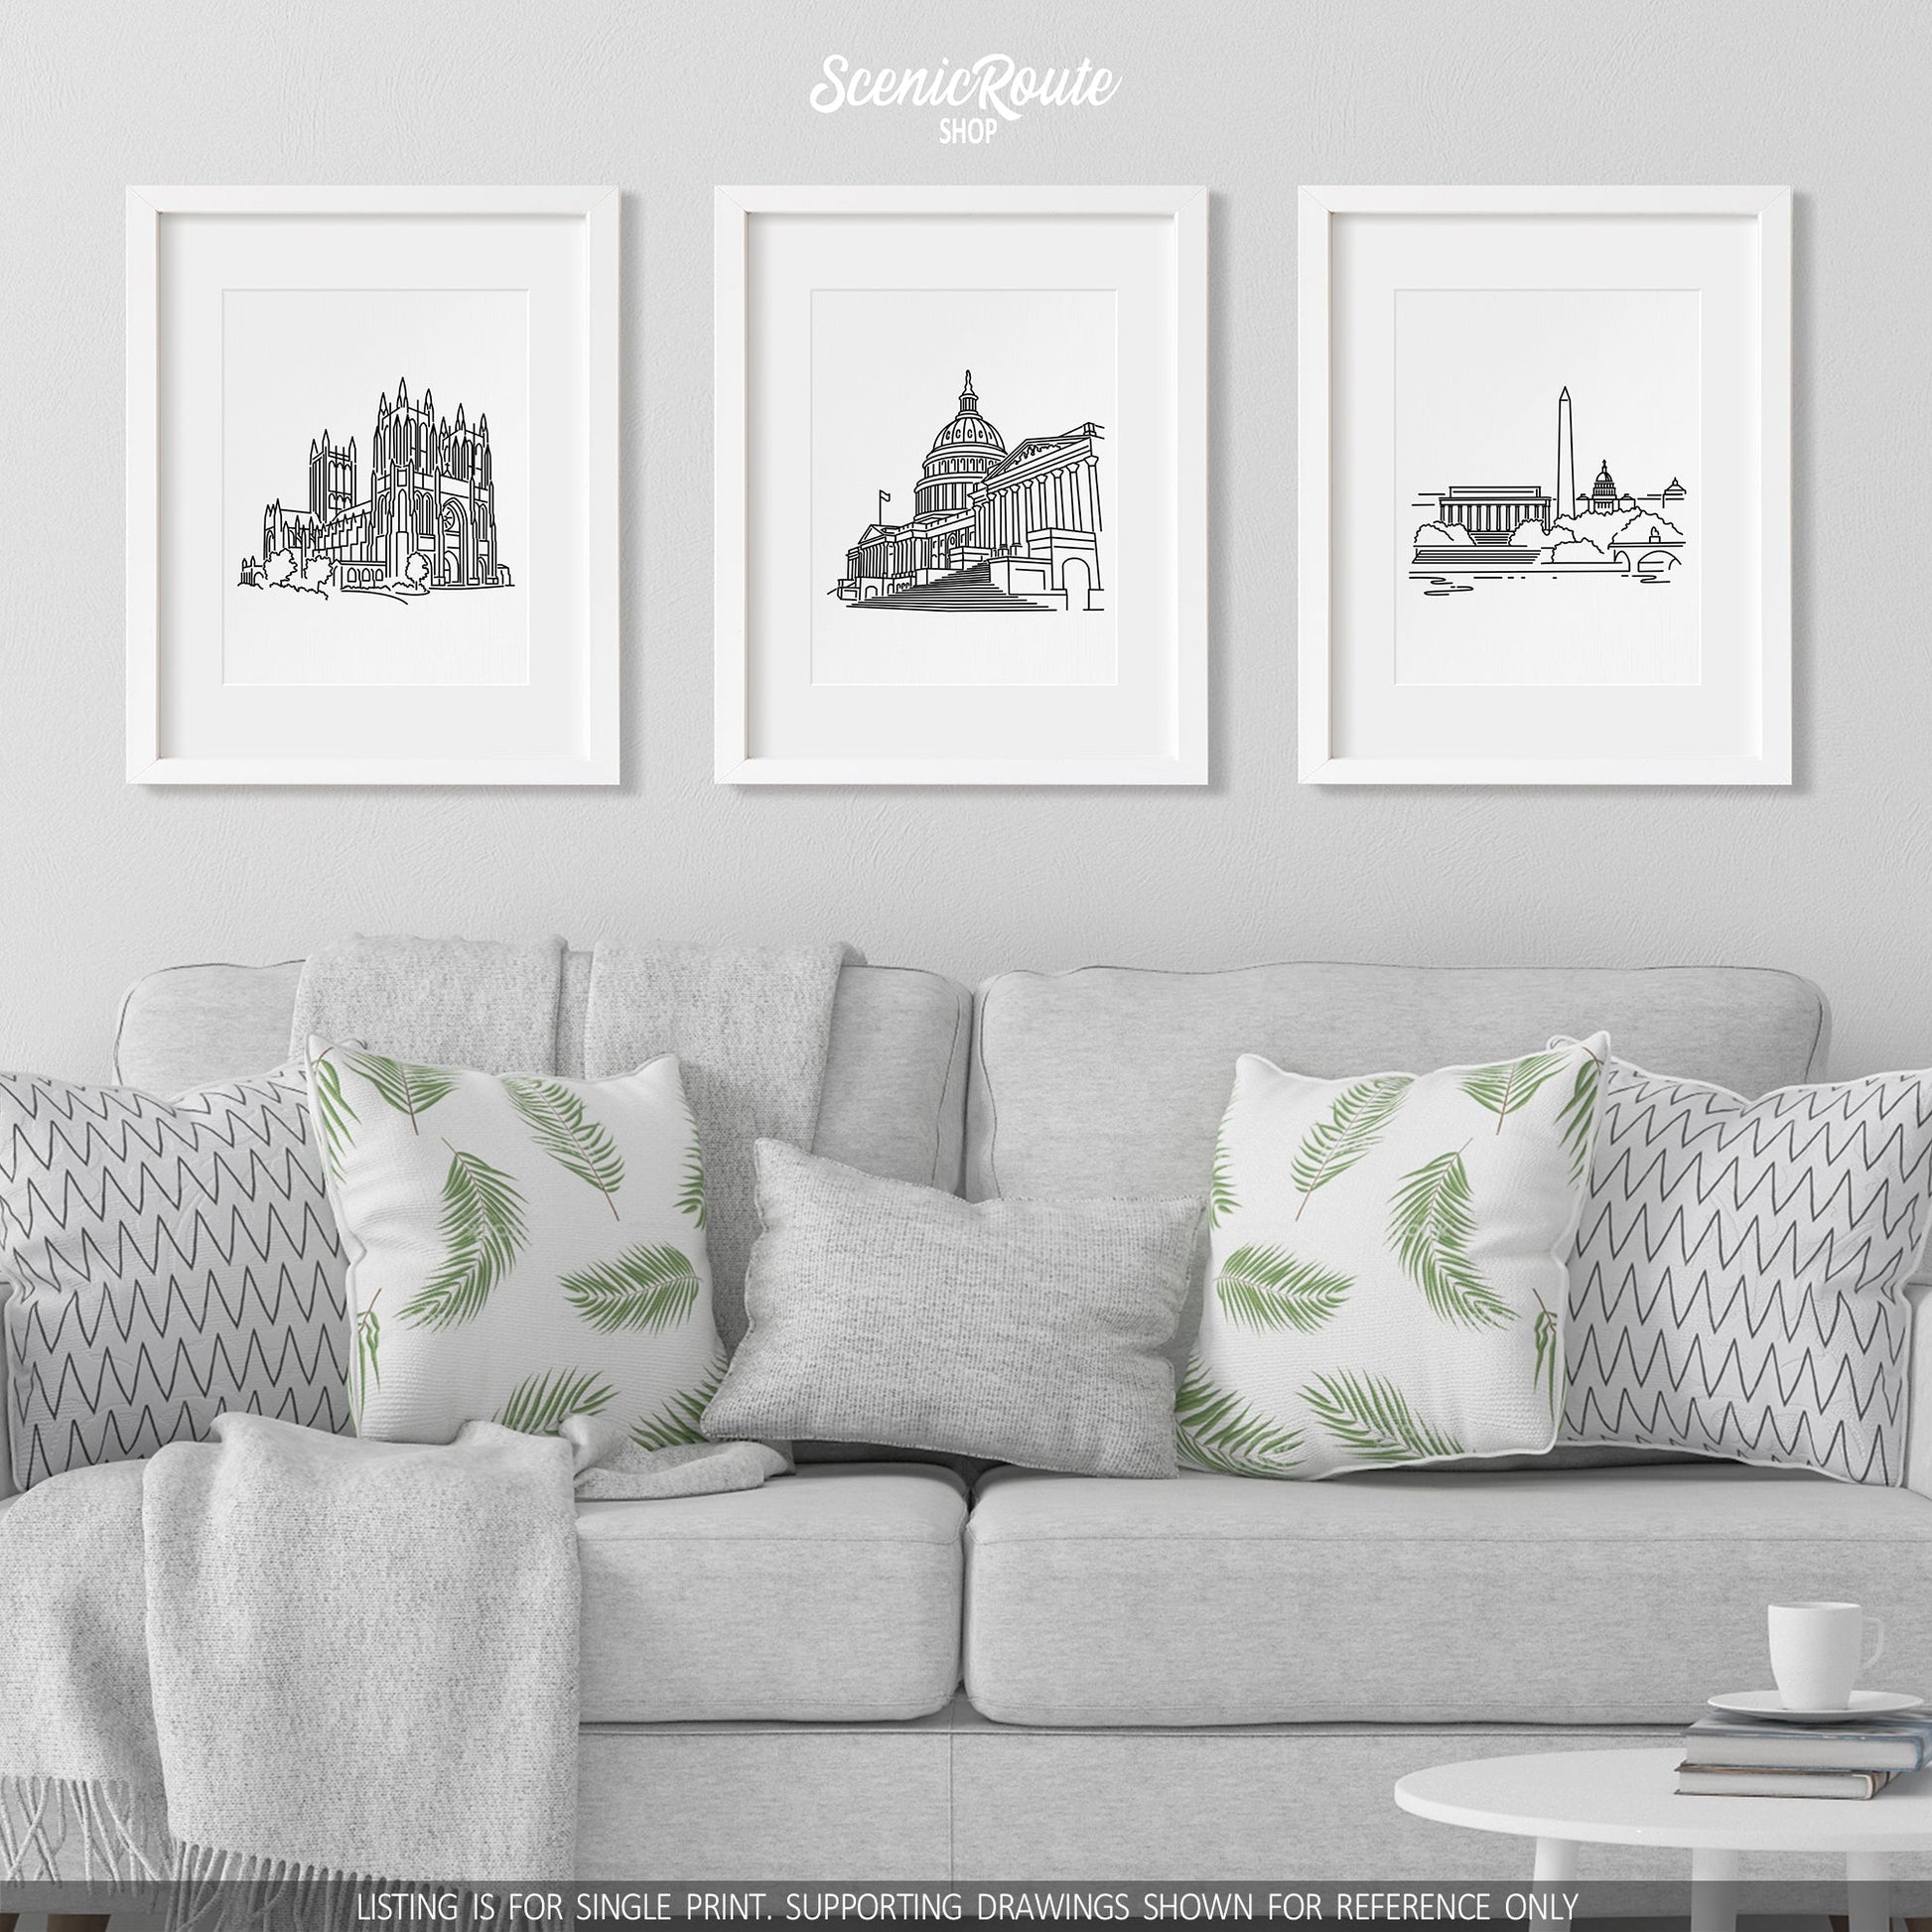 A group of three framed drawings on a white wall hanging above a couch with pillows and a blanket. The line art drawings include the National Cathedral, Capitol, and Washington Skyline